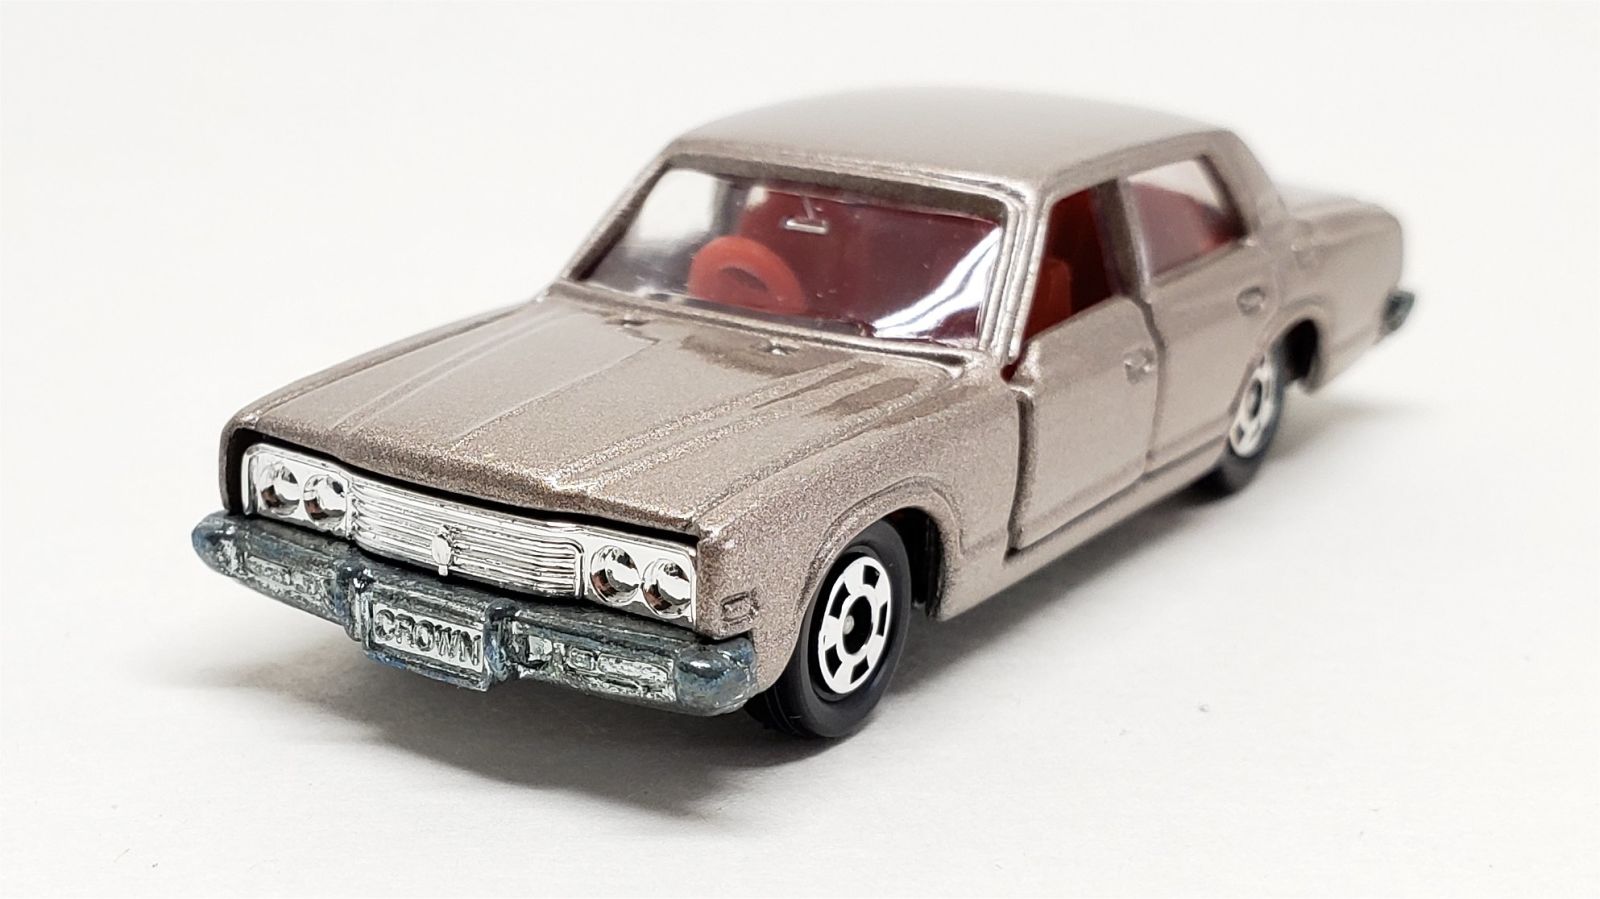 Illustration for article titled [REVIEW] Tomica Toyota Crown 2600